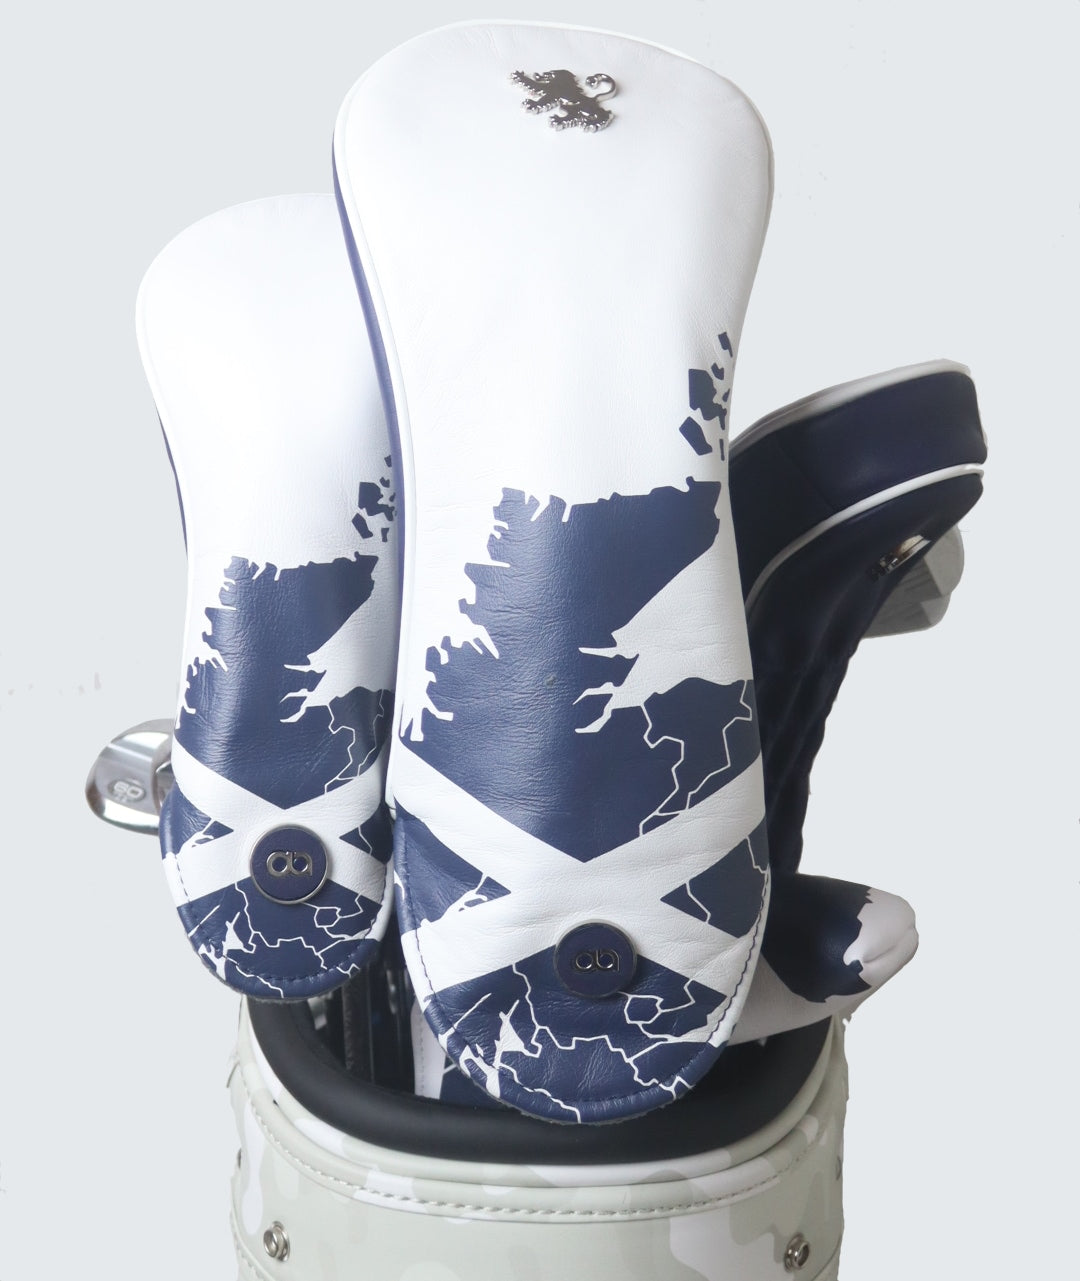 Set of Scotland white and navy blue leather fairway wood headcovers by David Alexander